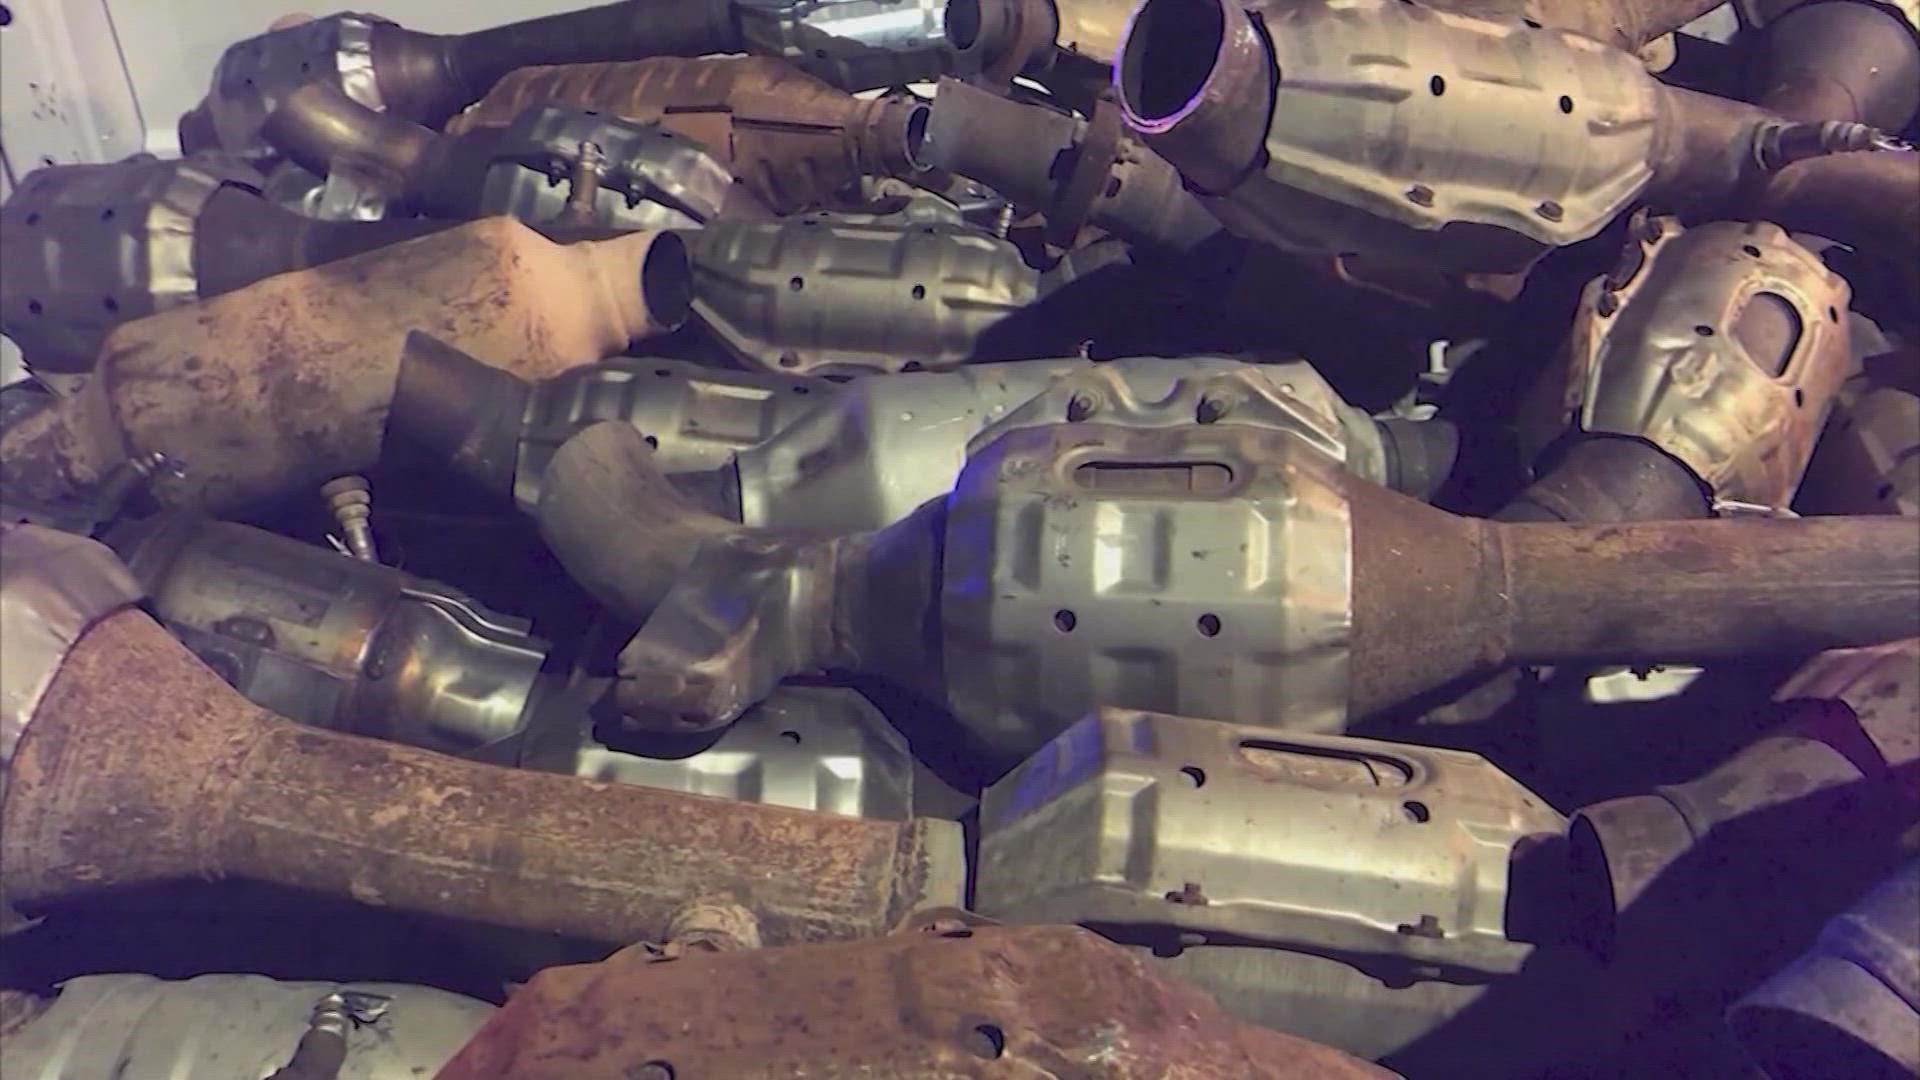 Stolen catalytic converter insurance claims up by 5,300% in Texas since 2019, AAA reports.